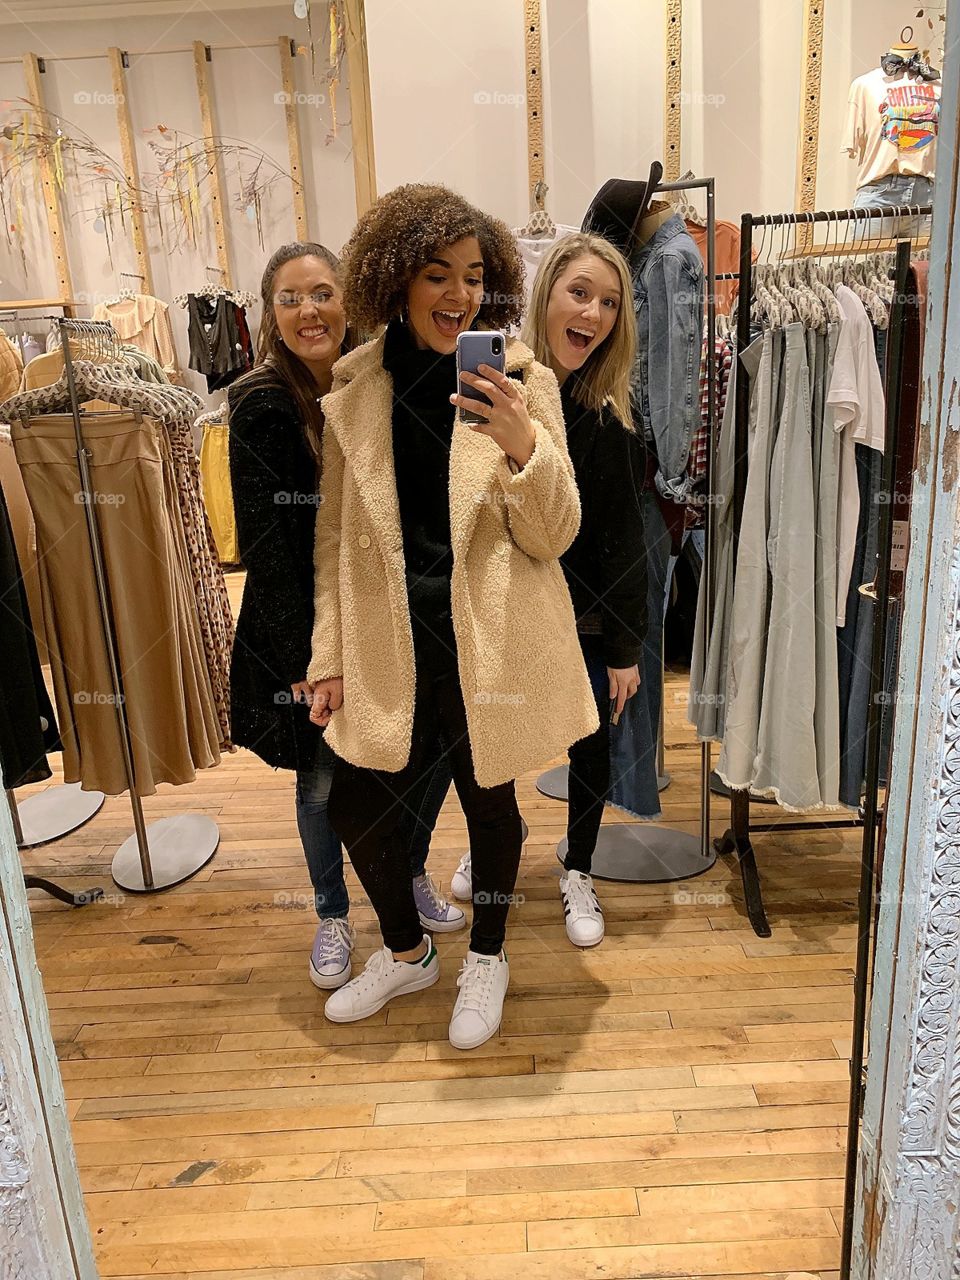 three beautiful friends being silly together as they shop in a clothing store in the city